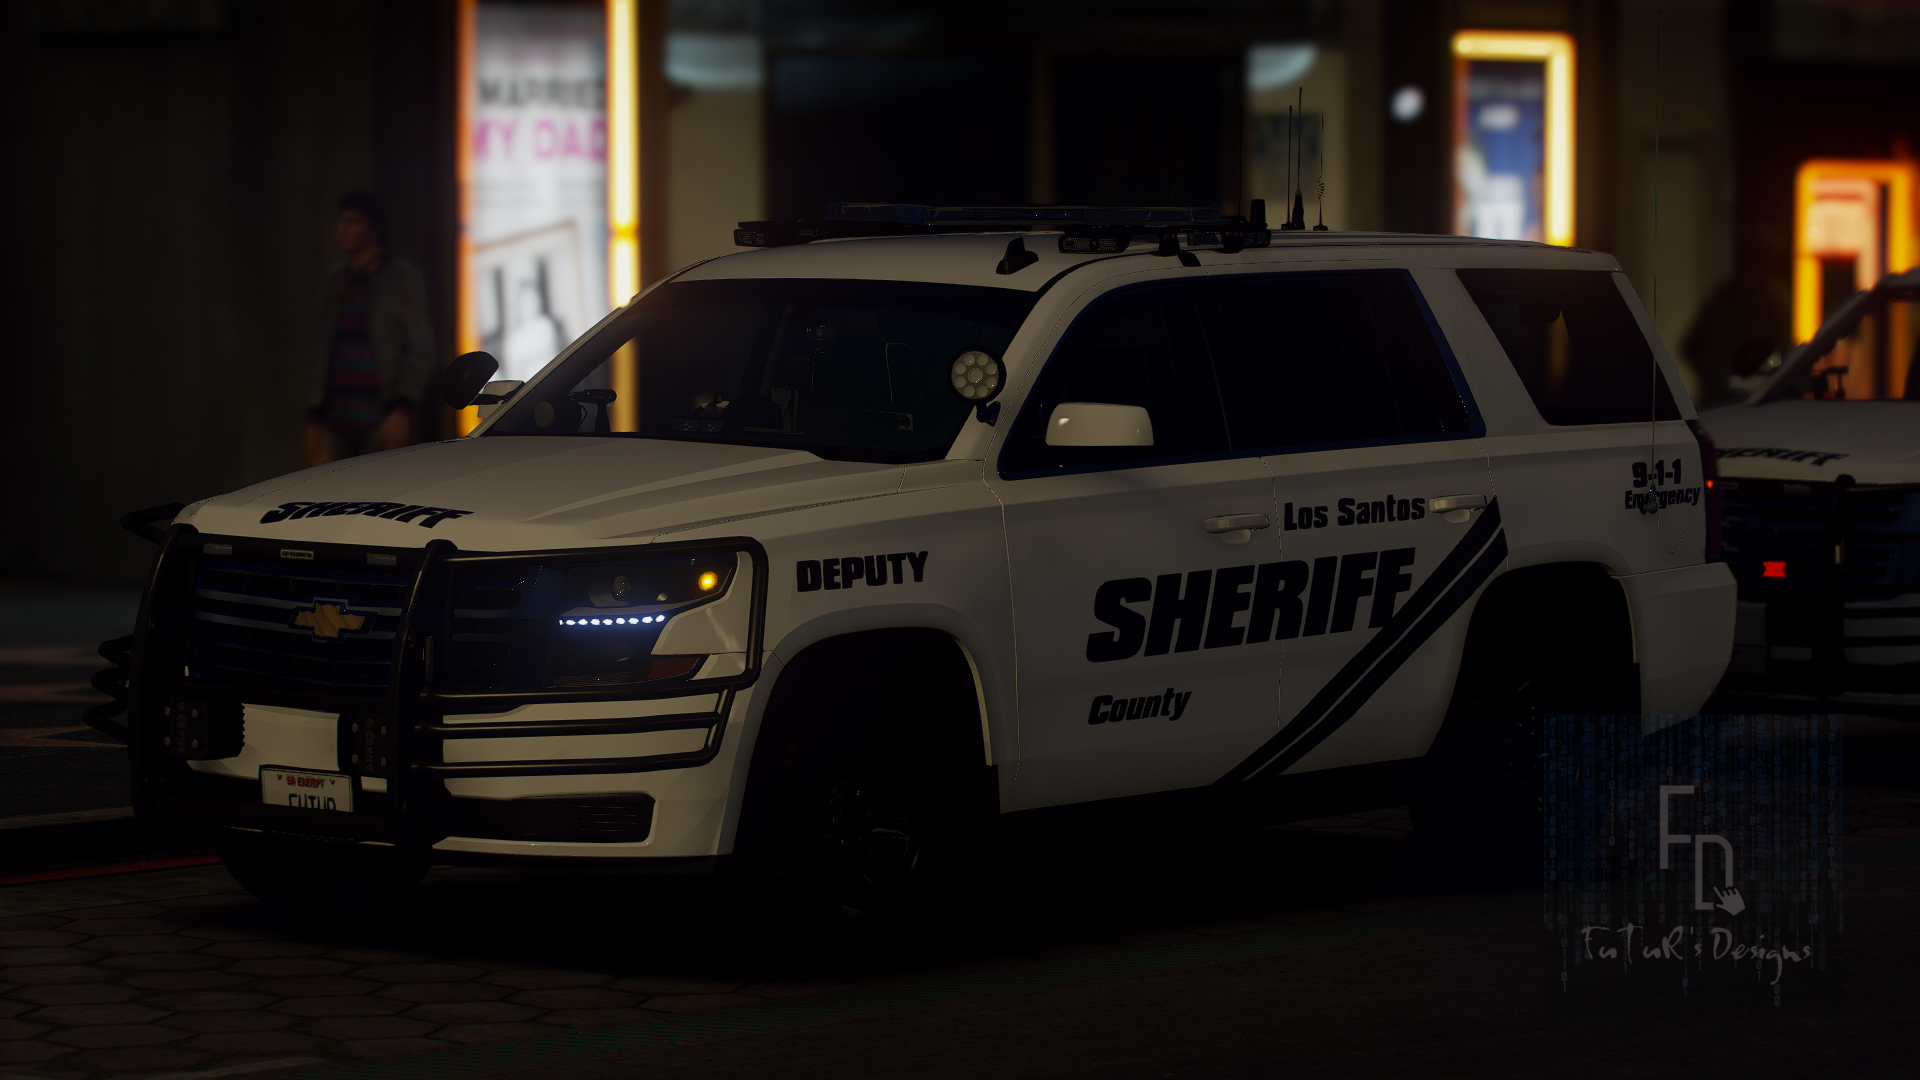 Grand_Theft_Auto_V_10_09_2021_21_40_40.png